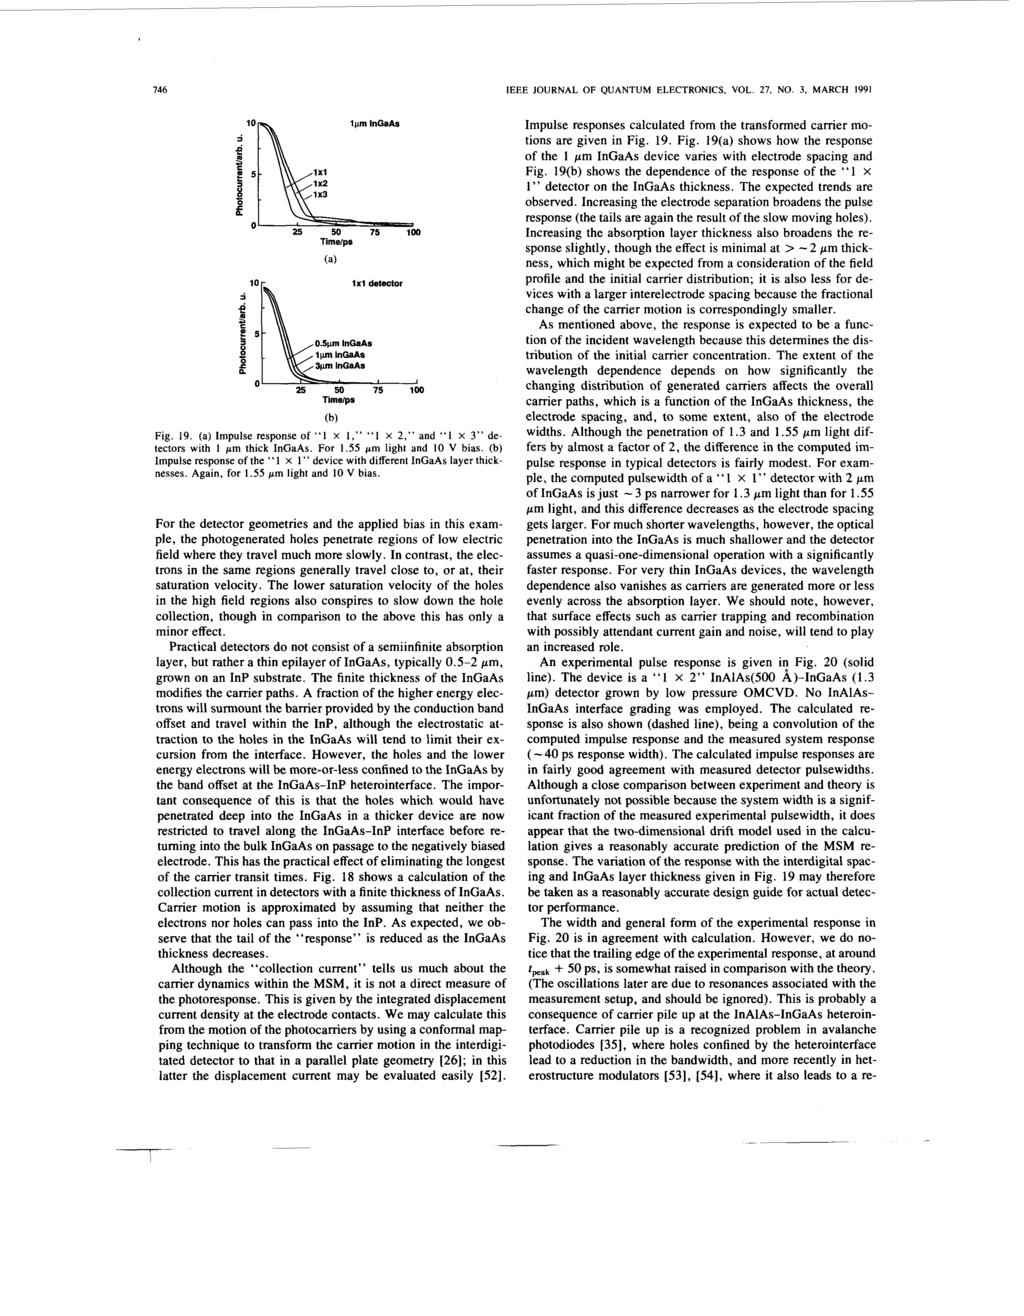 146 IEEE JOURNAL OF QUANTUM ELECTRONICS, VOL. 21, NO. 3, MARCH 1991 Timeips (a) OSpm InGaAs lpm InGaAs lpm InGaAs 1x1 detector 25 50 75 Timelps J 100 (b) Fig. 19. (a) Impulse response of I X I, 1 X 2, and I X 3 detectors with l pm thick InGaAs.